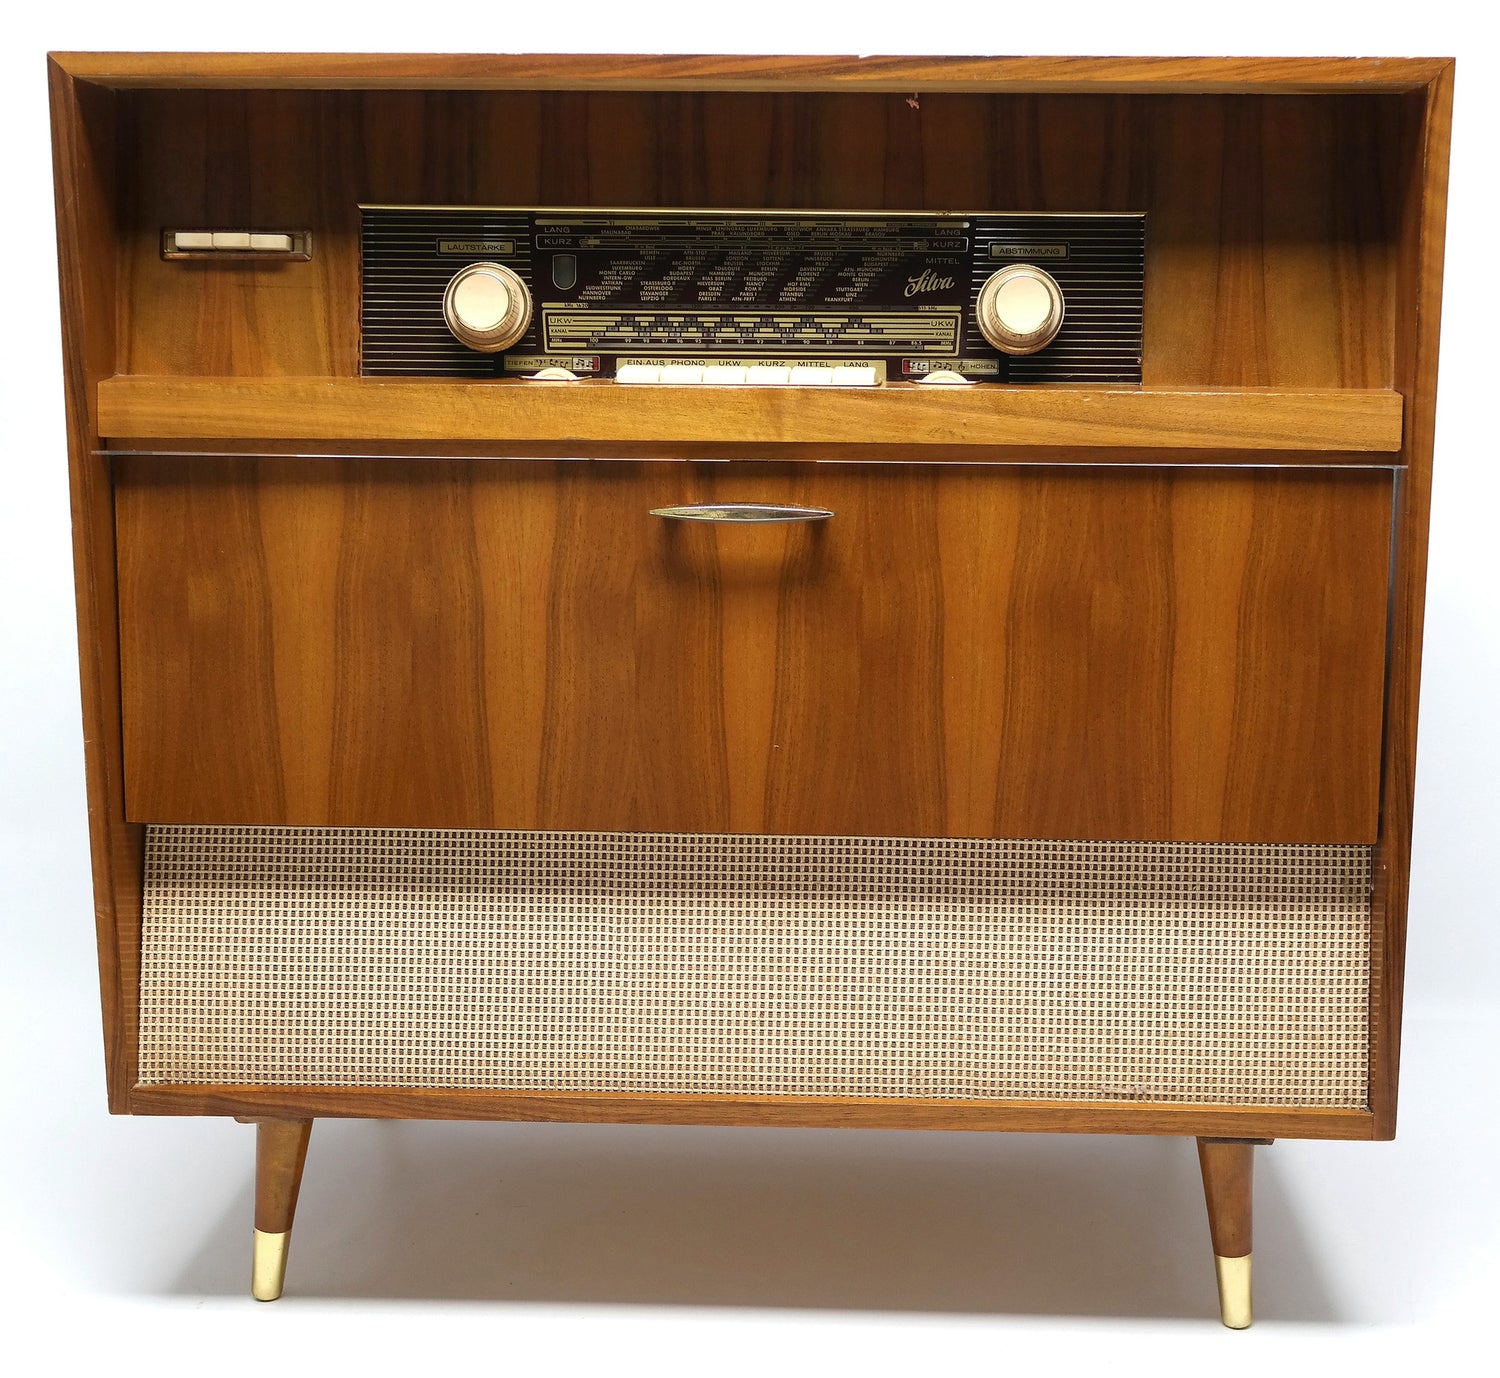 MCM  - 60's GERMAN Silva - Mid Century Console Record Player - Bluetooth iPod iPhone Android Input AM/FM Tuner The Vintedge Co.